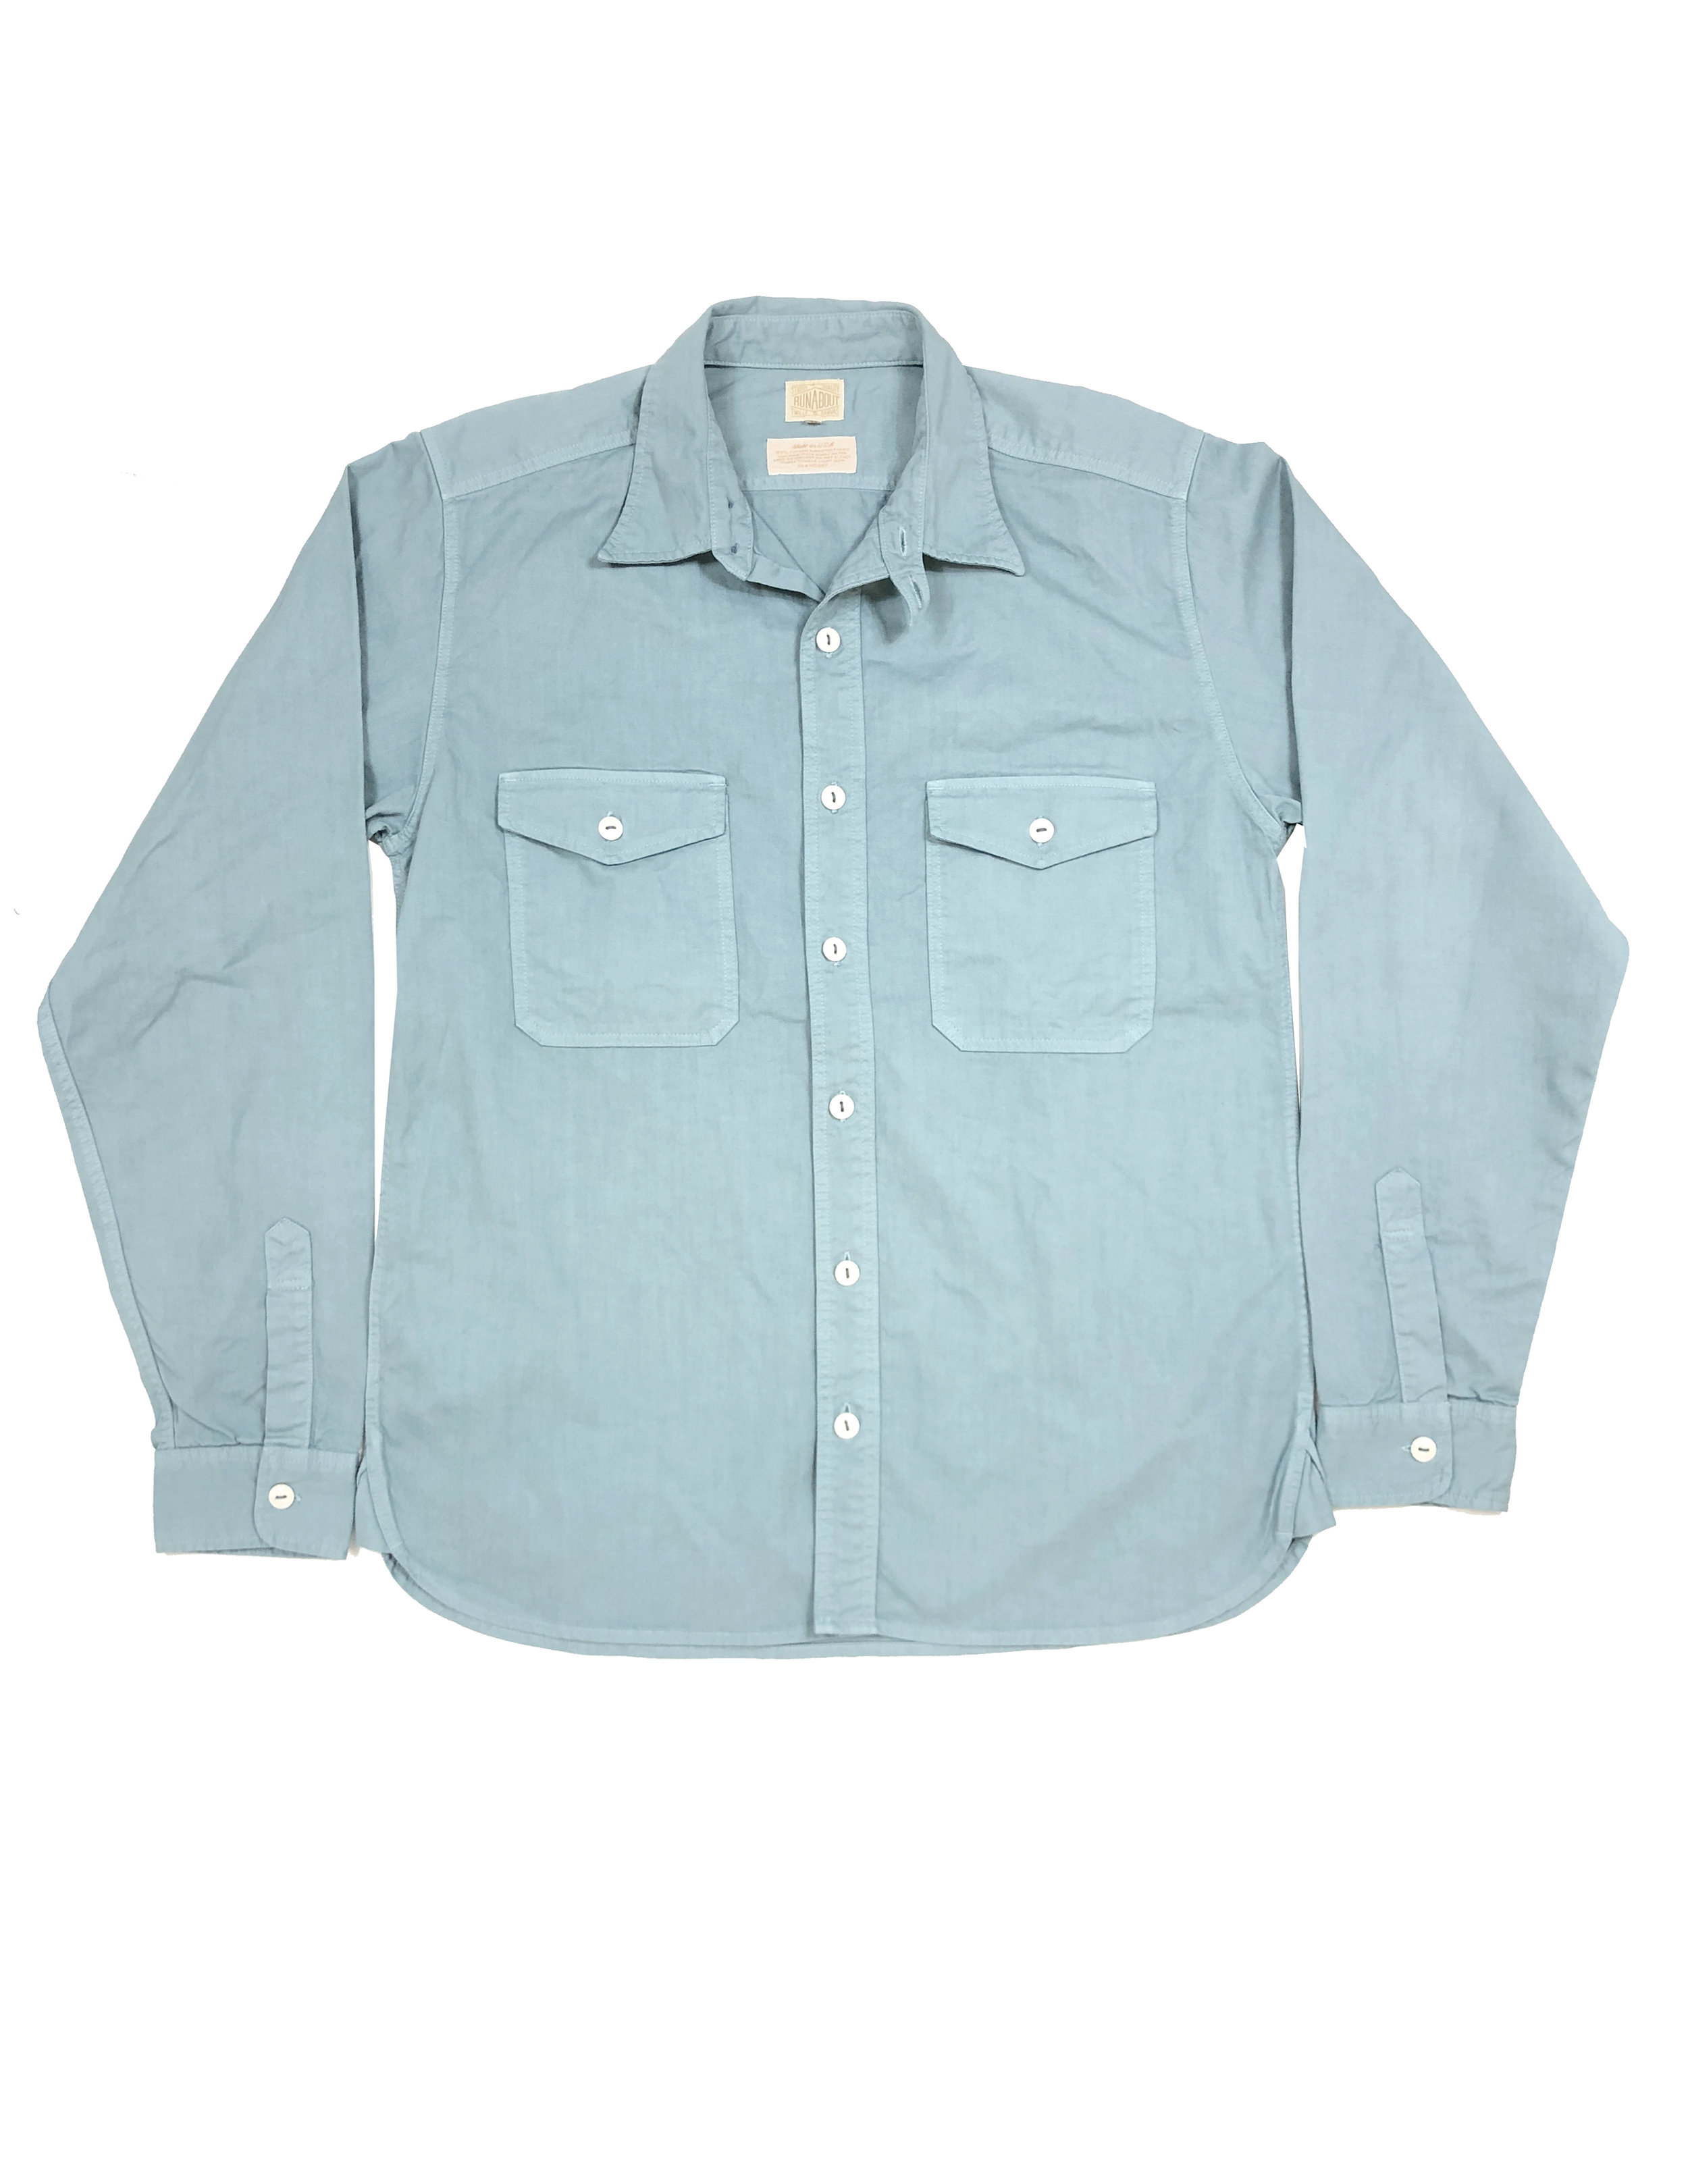 Guide Shirt - Foliage — Runabout Goods